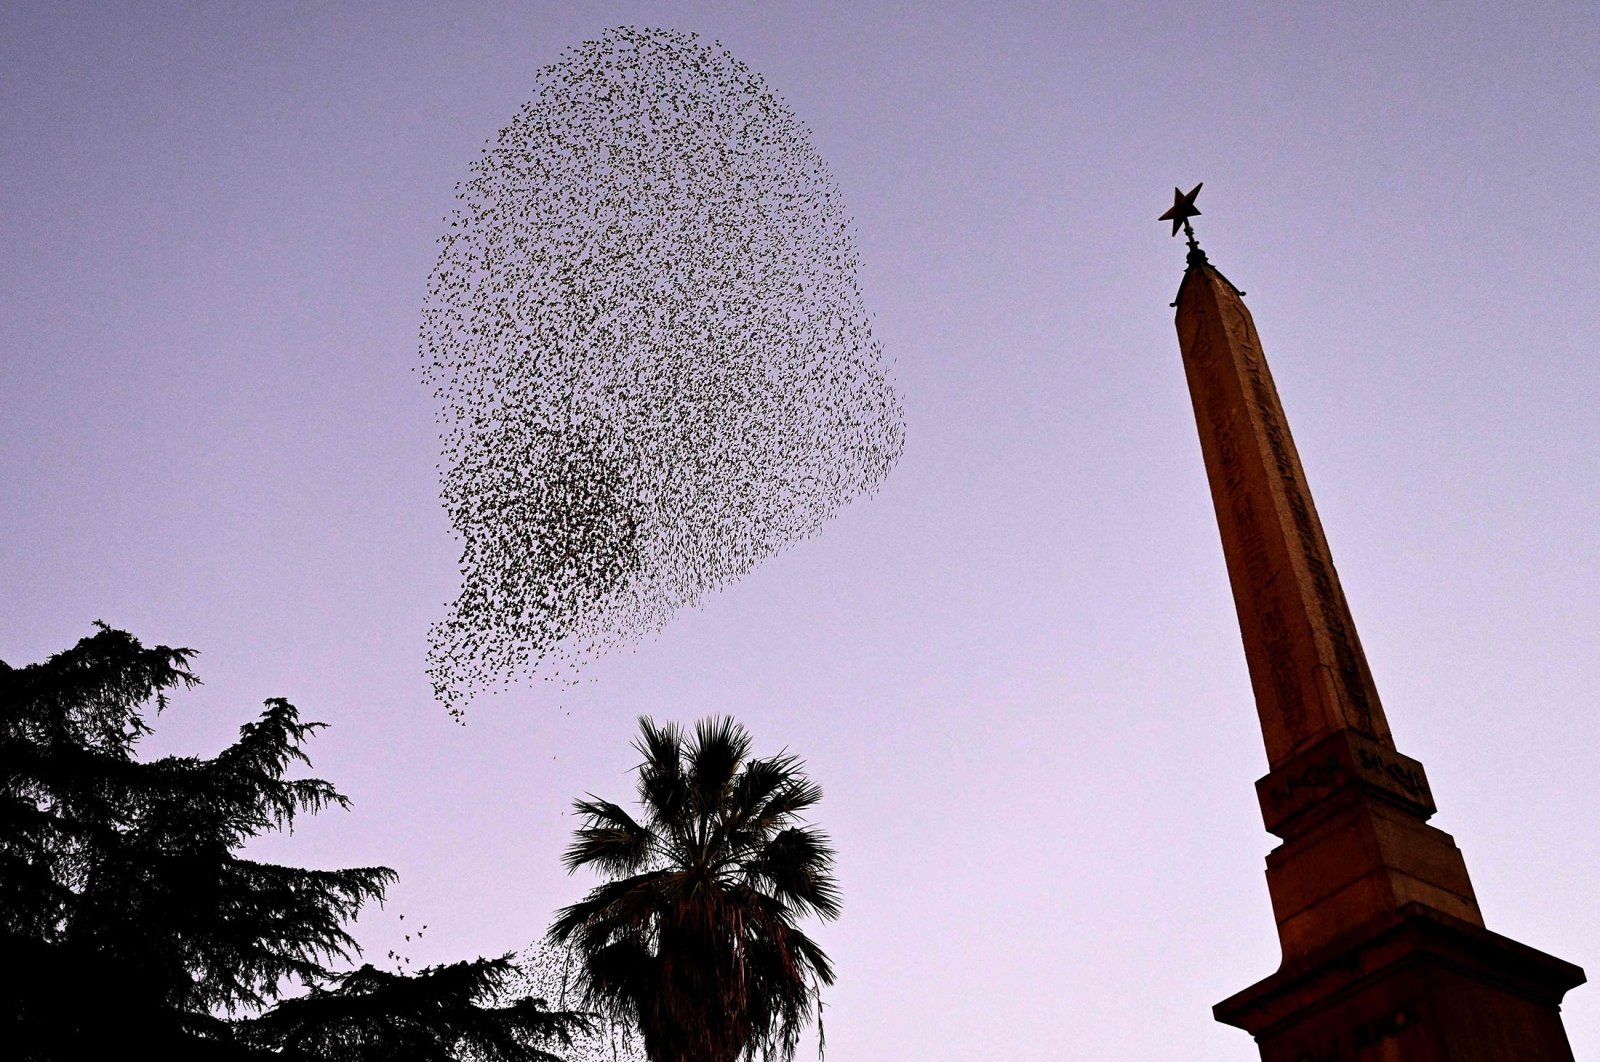 Wintering starlings fly over Piazza dei Cinquecento by the Termini railway station in downtown Rome, Italy, Jan. 14, 2022. (AFP Photo)